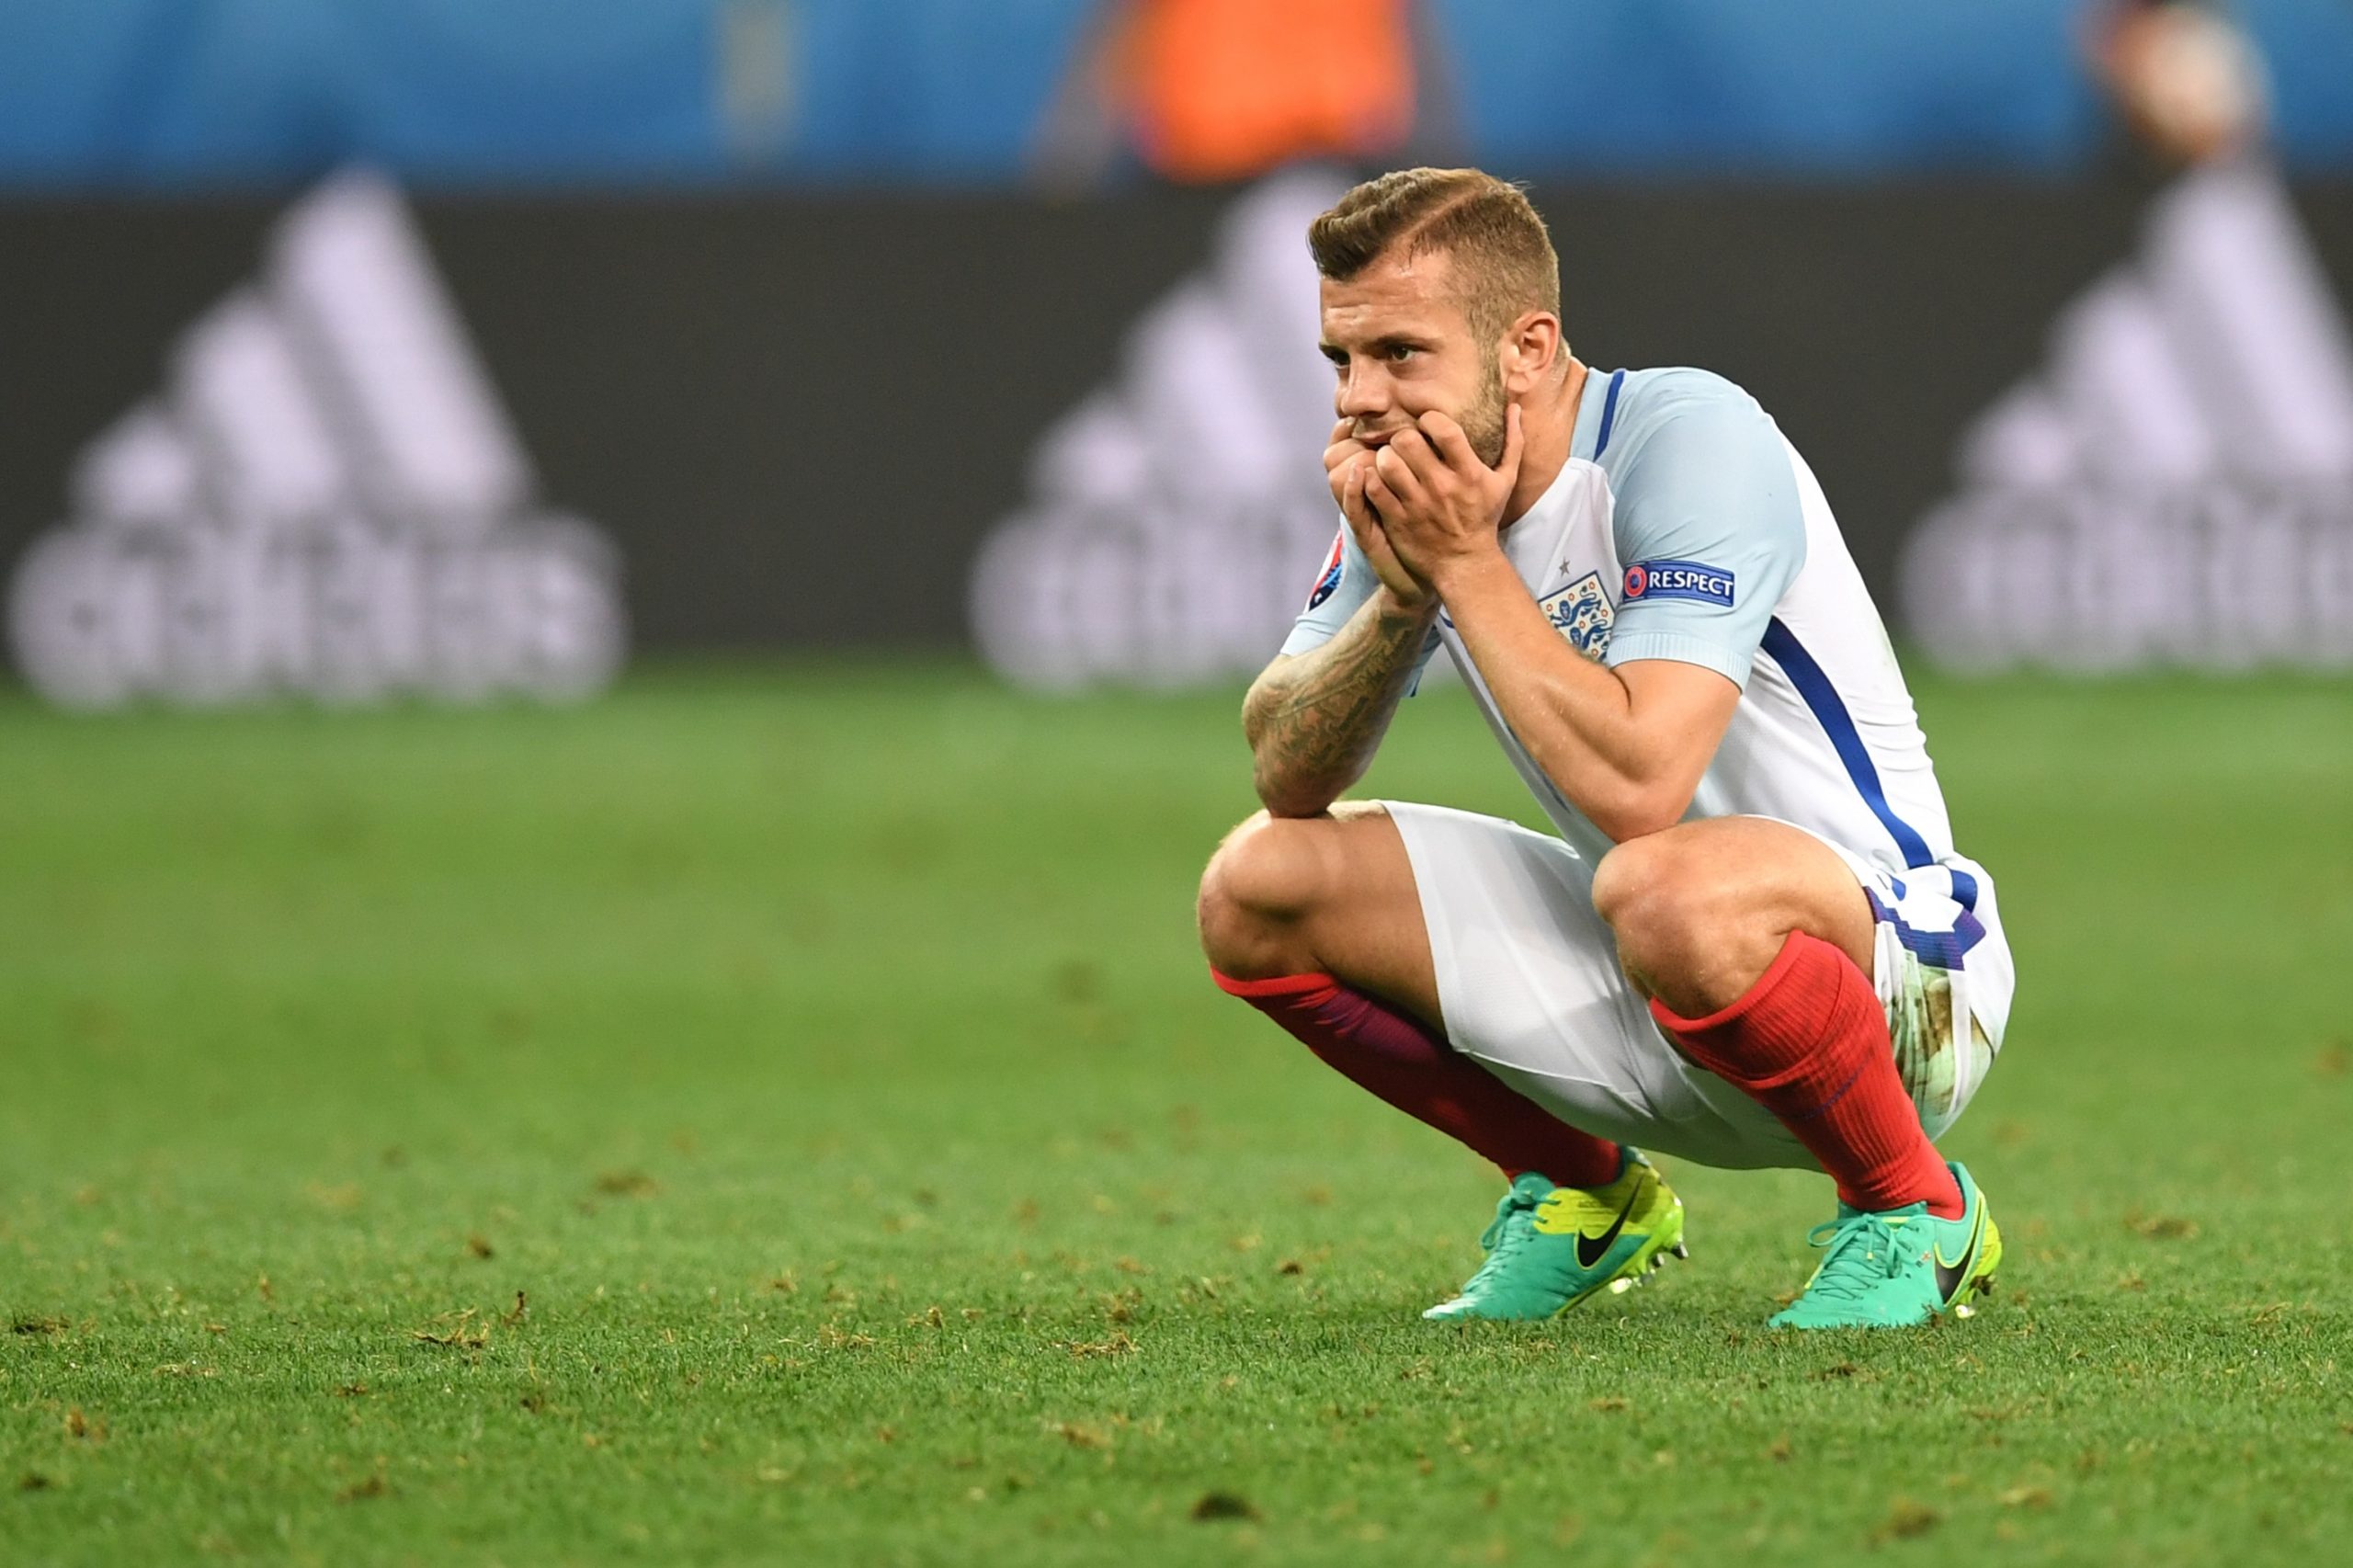 England's midfielder Jack Wilshere reacts after England lost 1-2 to Iceland in the Euro 2016 round of 16 football match between England and Iceland at the Allianz Riviera stadium in Nice on June 27, 2016.   / AFP / PAUL ELLIS        (Photo credit should read PAUL ELLIS/AFP/Getty Images)